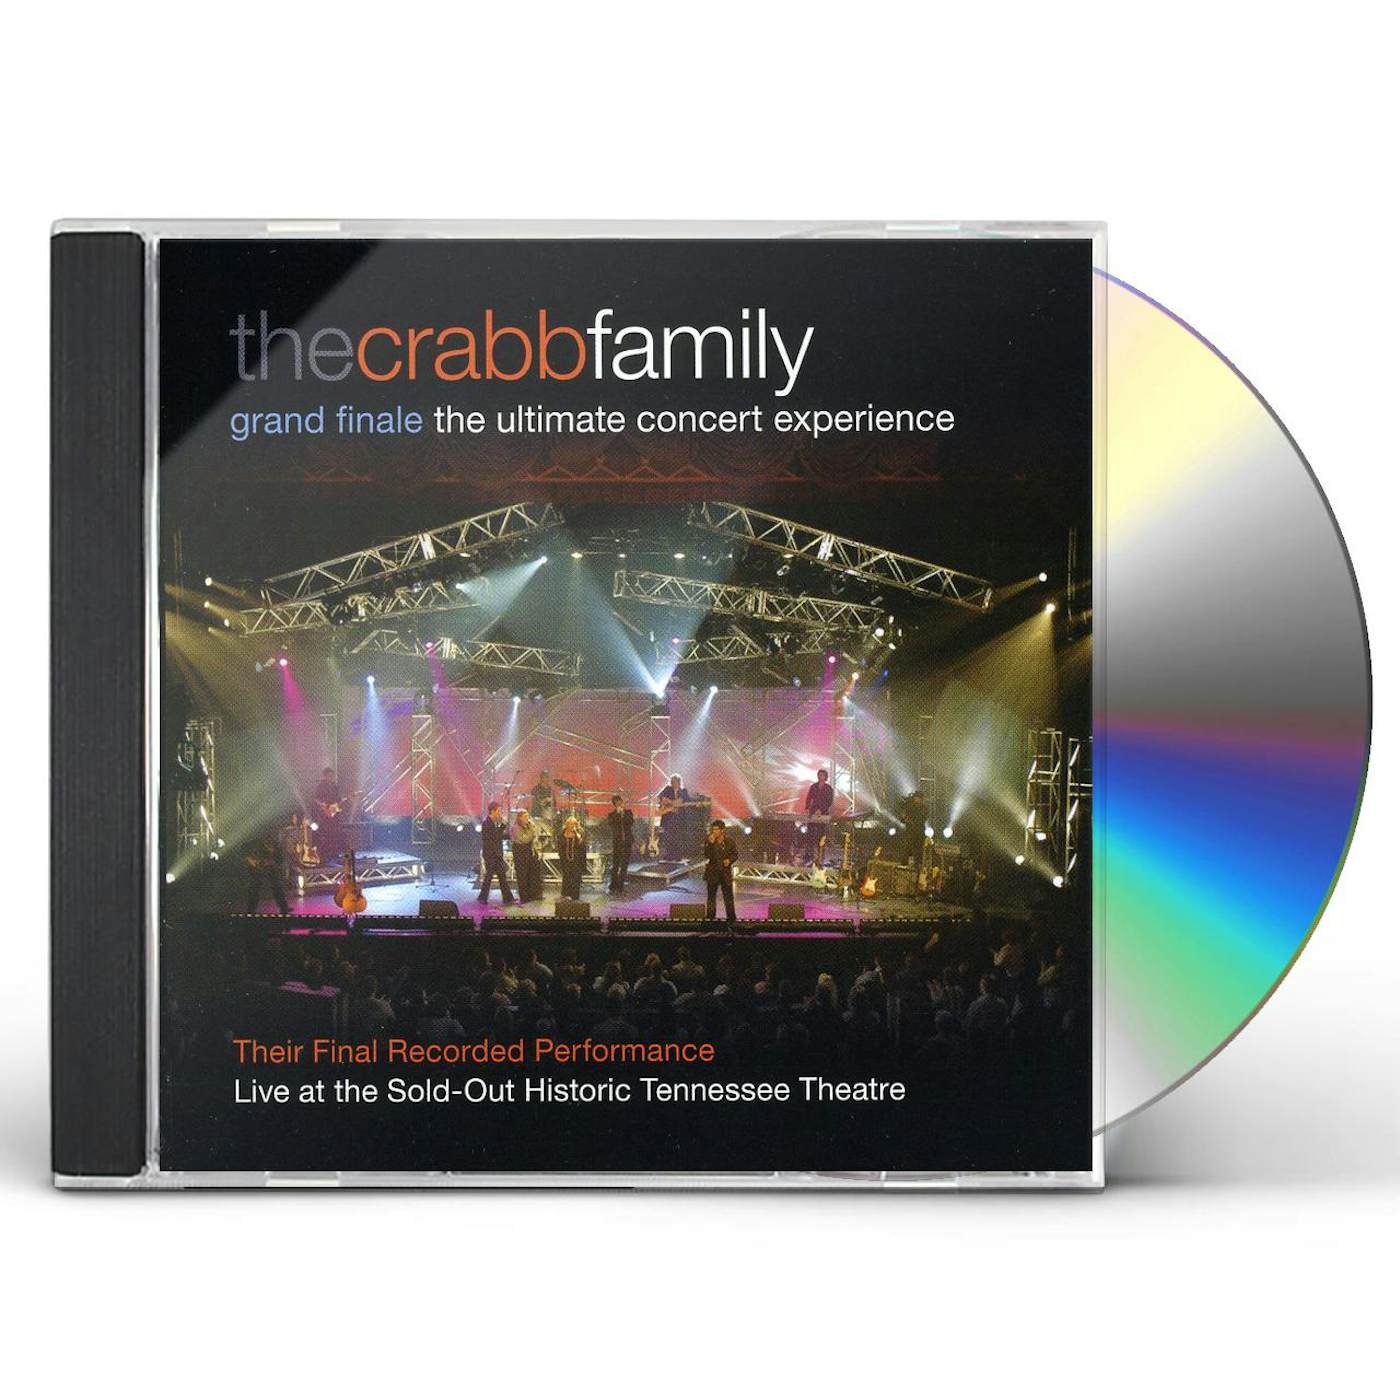 The Crabb Family GRAND FINALE: THE ULTIMATE CONCERT EXPERIENCE CD